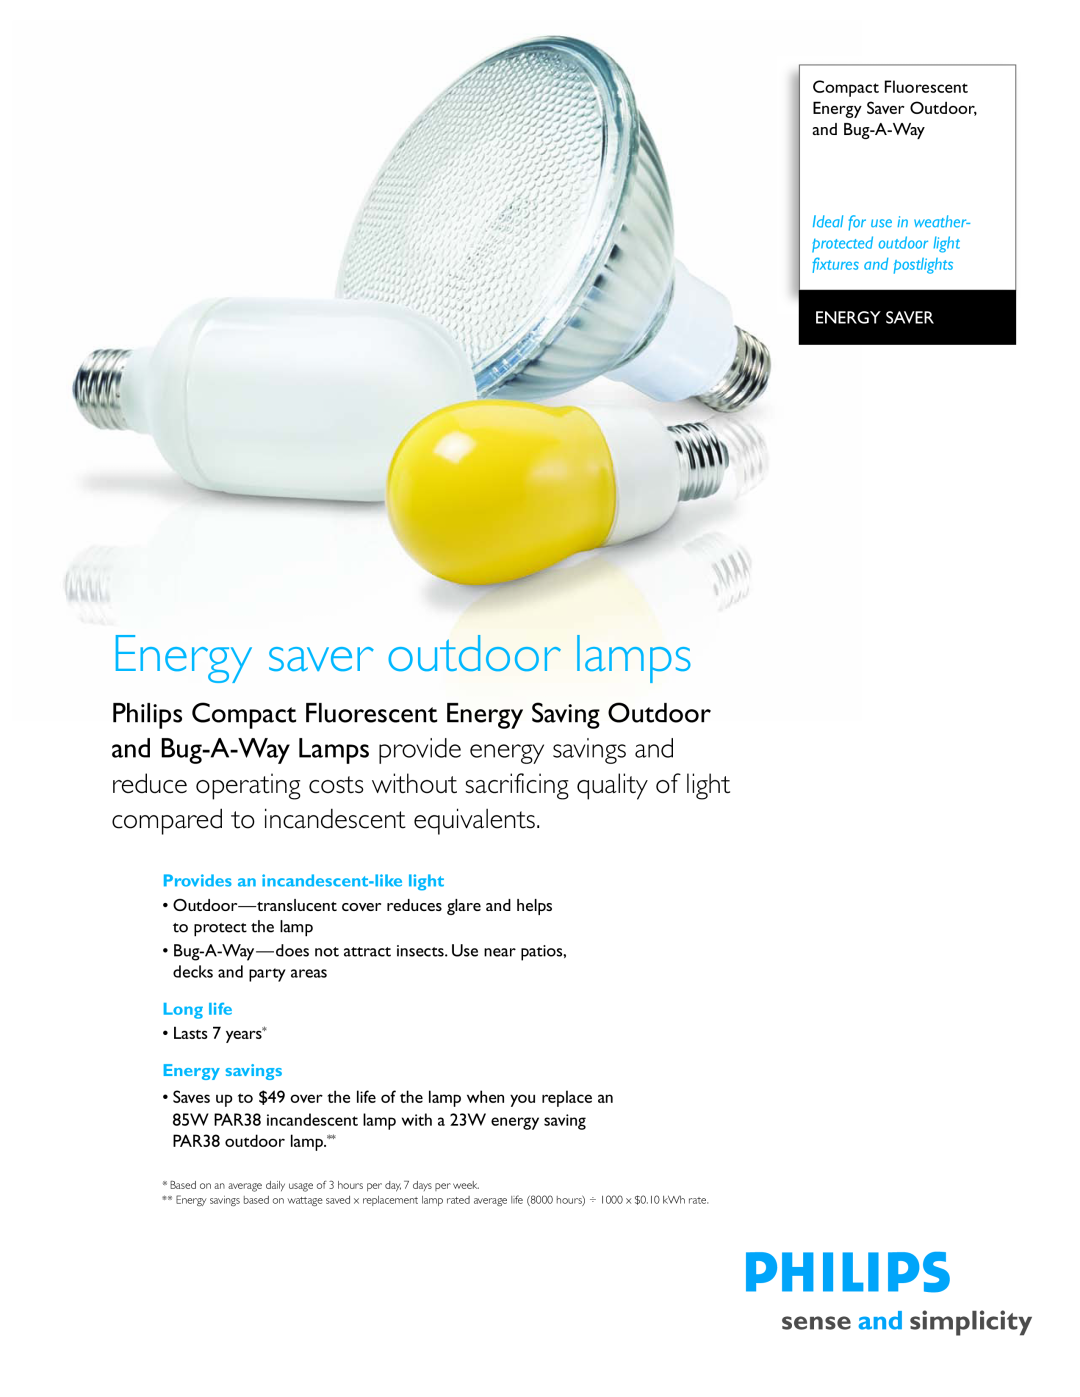 Philips P-5095-G manual Energy saver outdoor lamps, Philips Compact Fluorescent Energy Saving Outdoor, Long life 